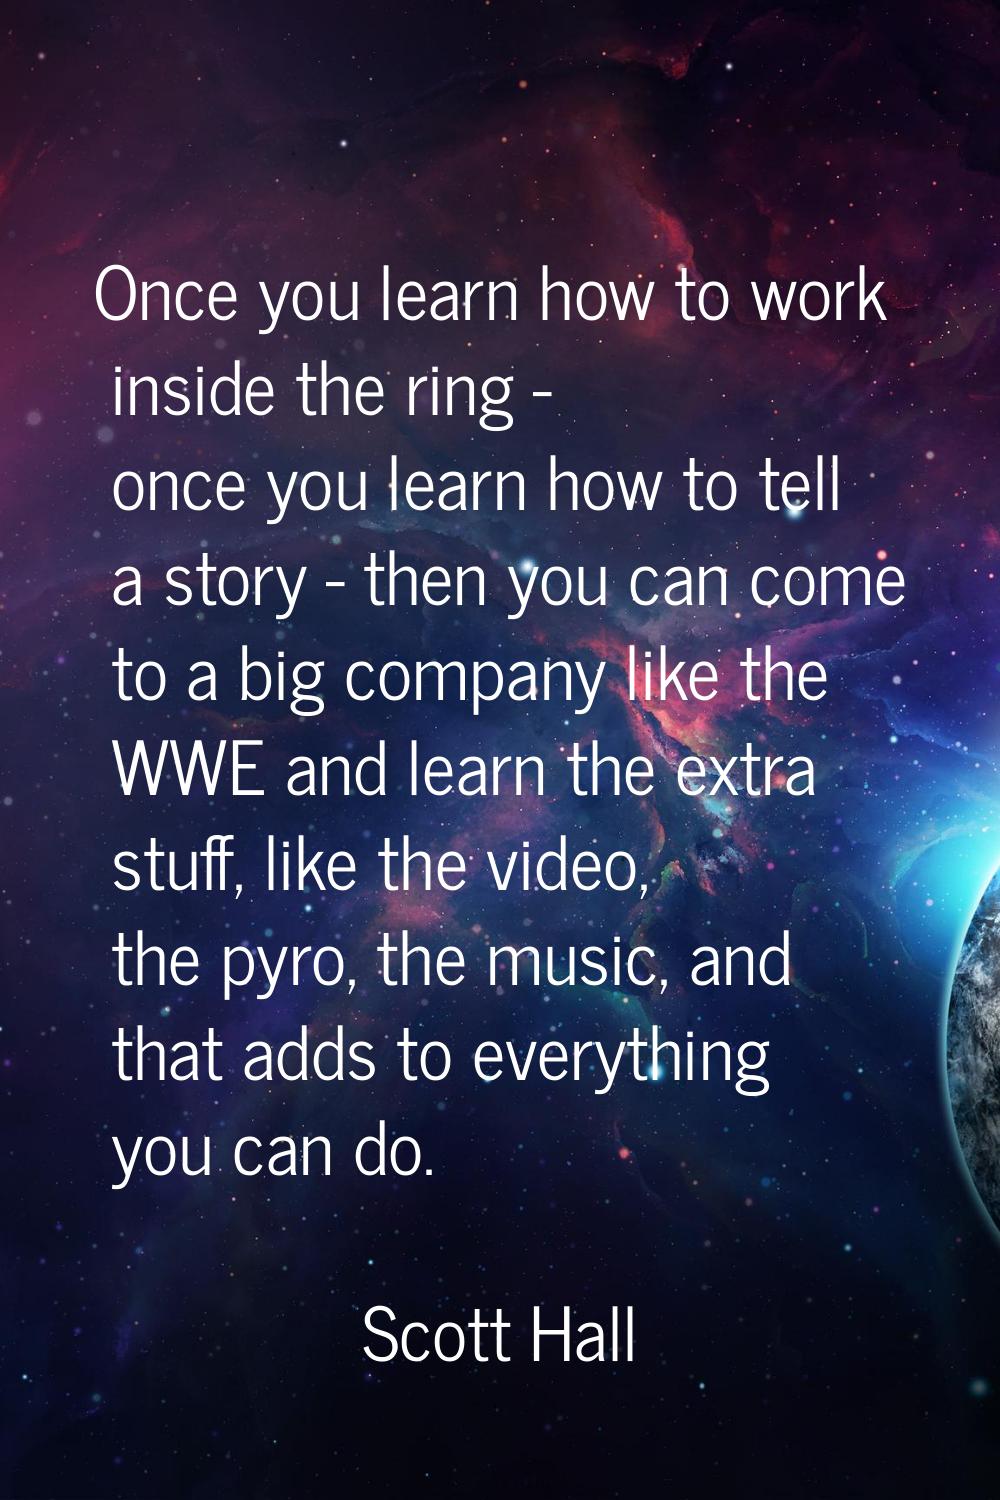 Once you learn how to work inside the ring - once you learn how to tell a story - then you can come